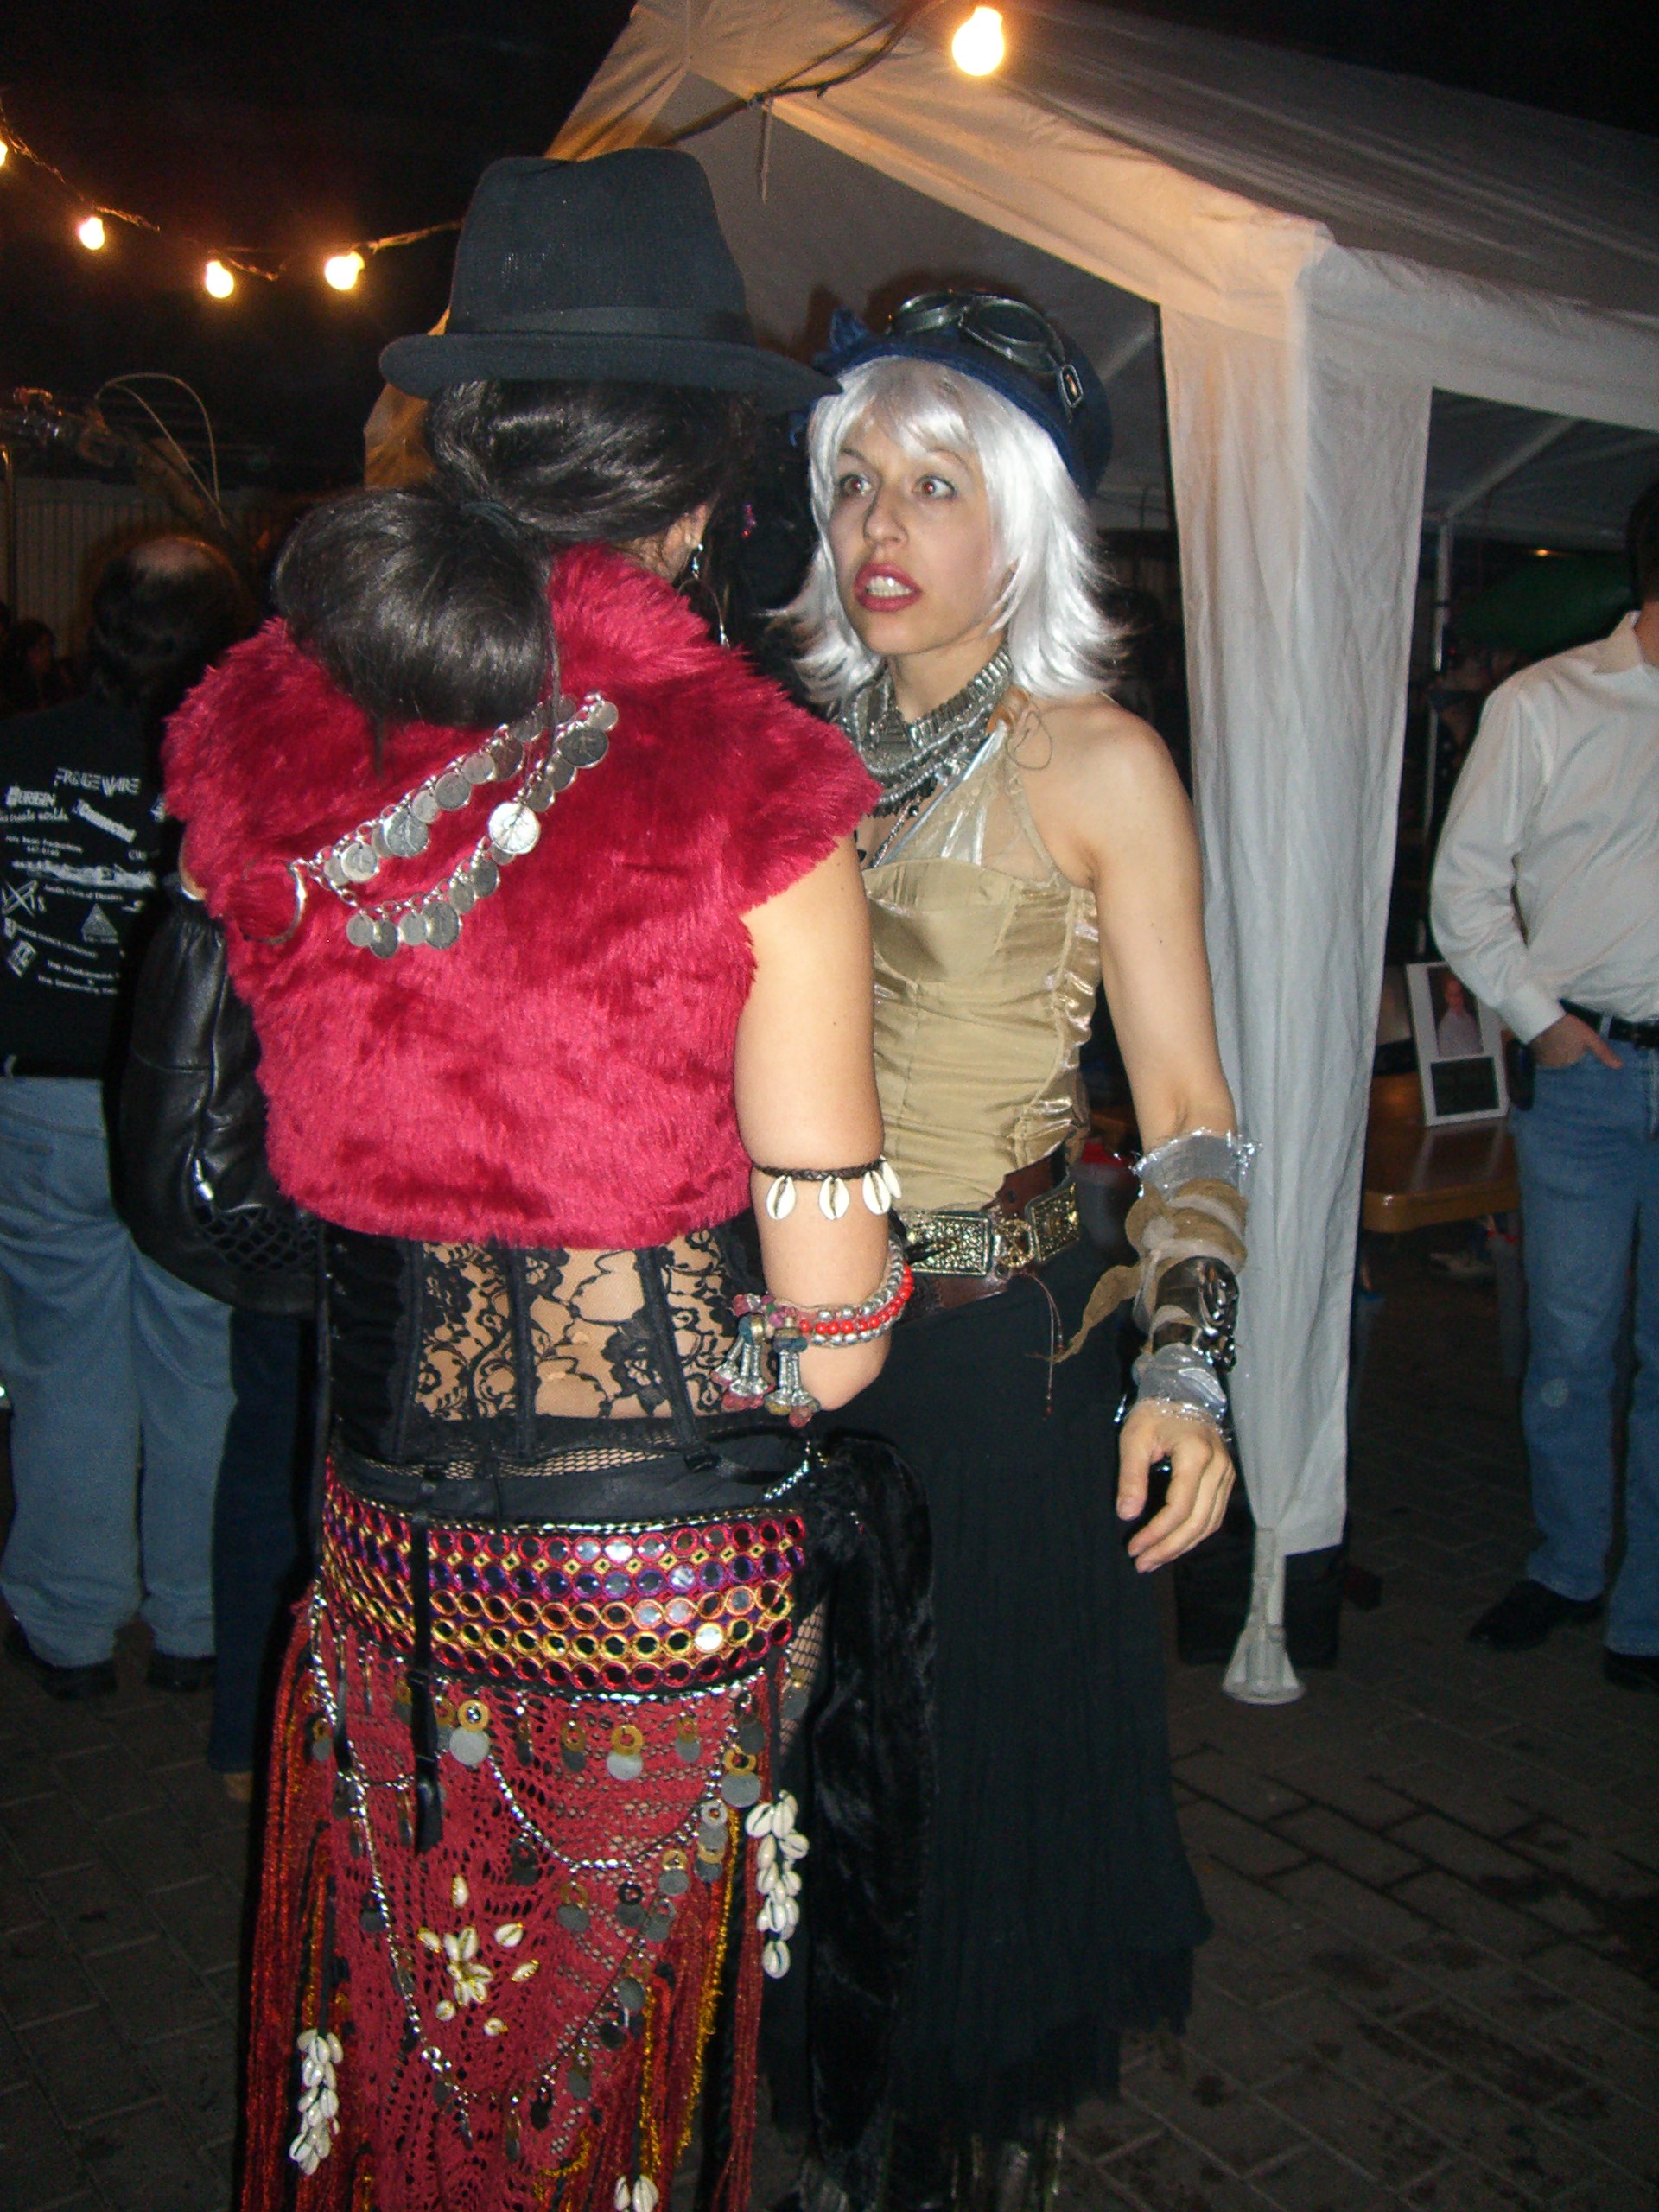 Red-and-black, a bellydancer sash with sequins - Steampunk party at SXSW 2007